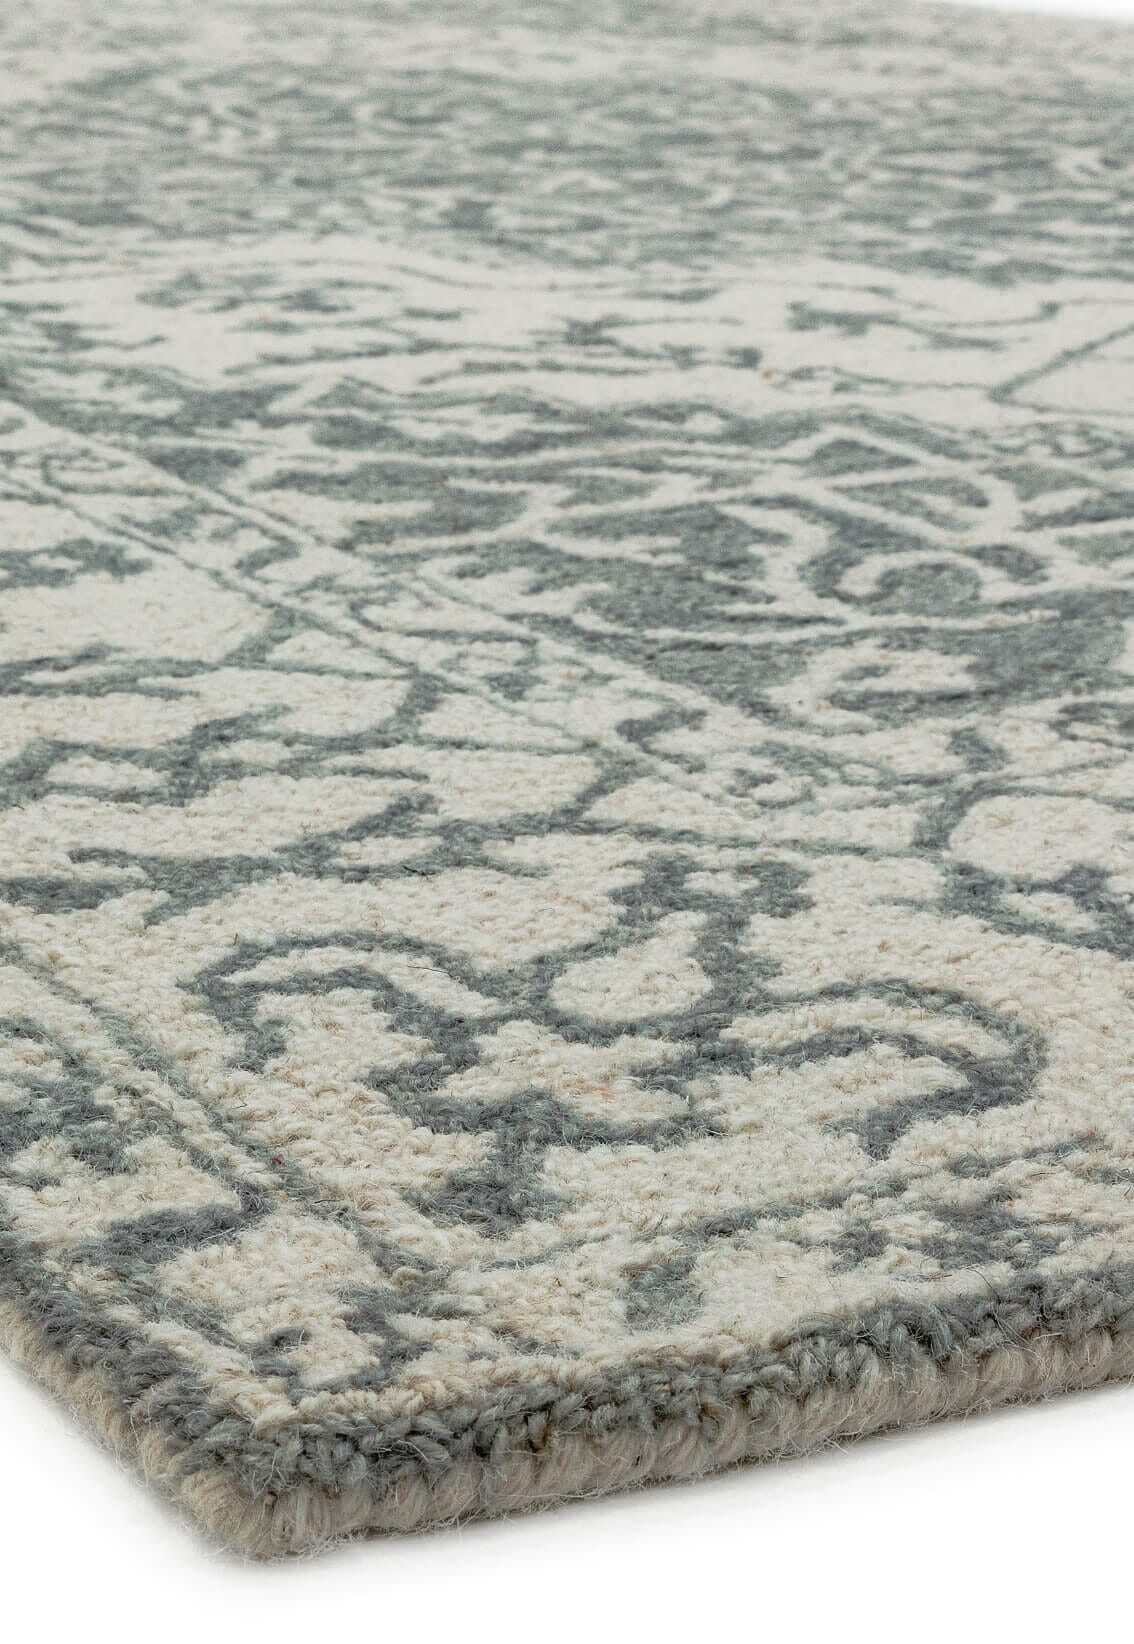  Asiatic Carpets-Asiatic Carpets Bronte Fine Loop Hand Tufted Rug Silver Grey - 160 x 230cm-Beige, Natural 245 